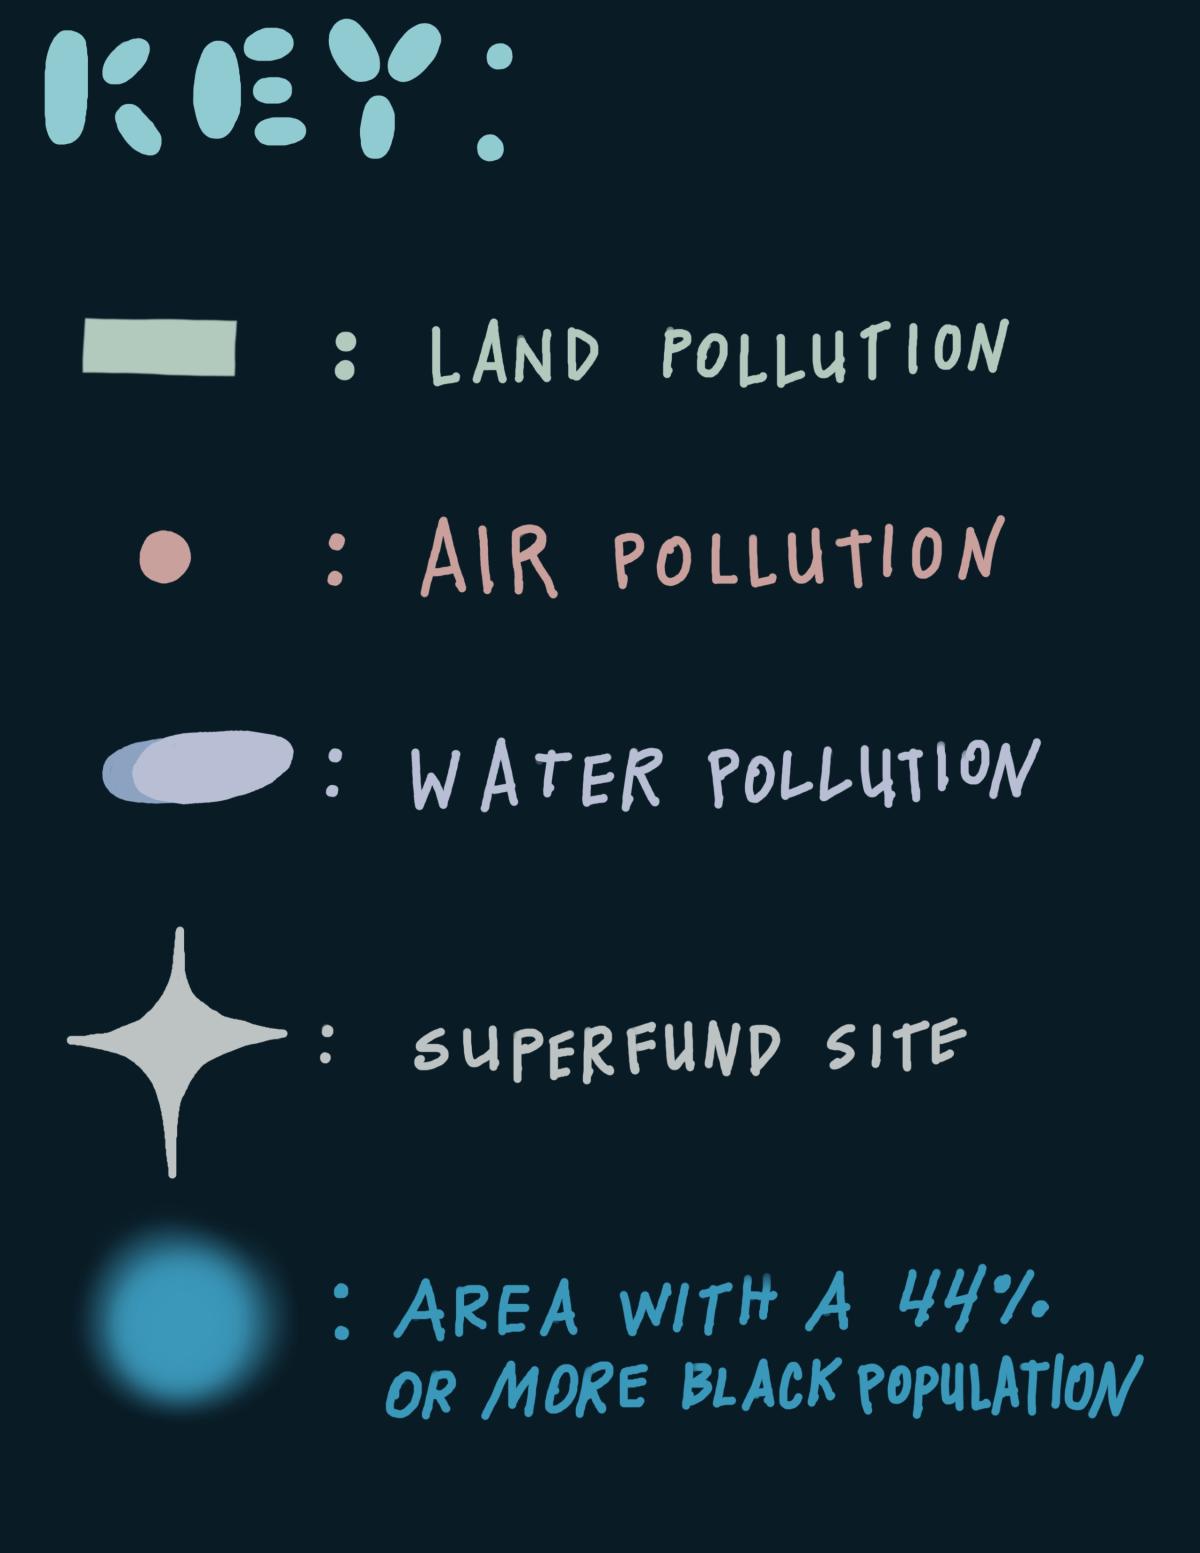 Legend lsiting land pollution, air pollution, water pollution, superfund site, and areas with >44% black population.